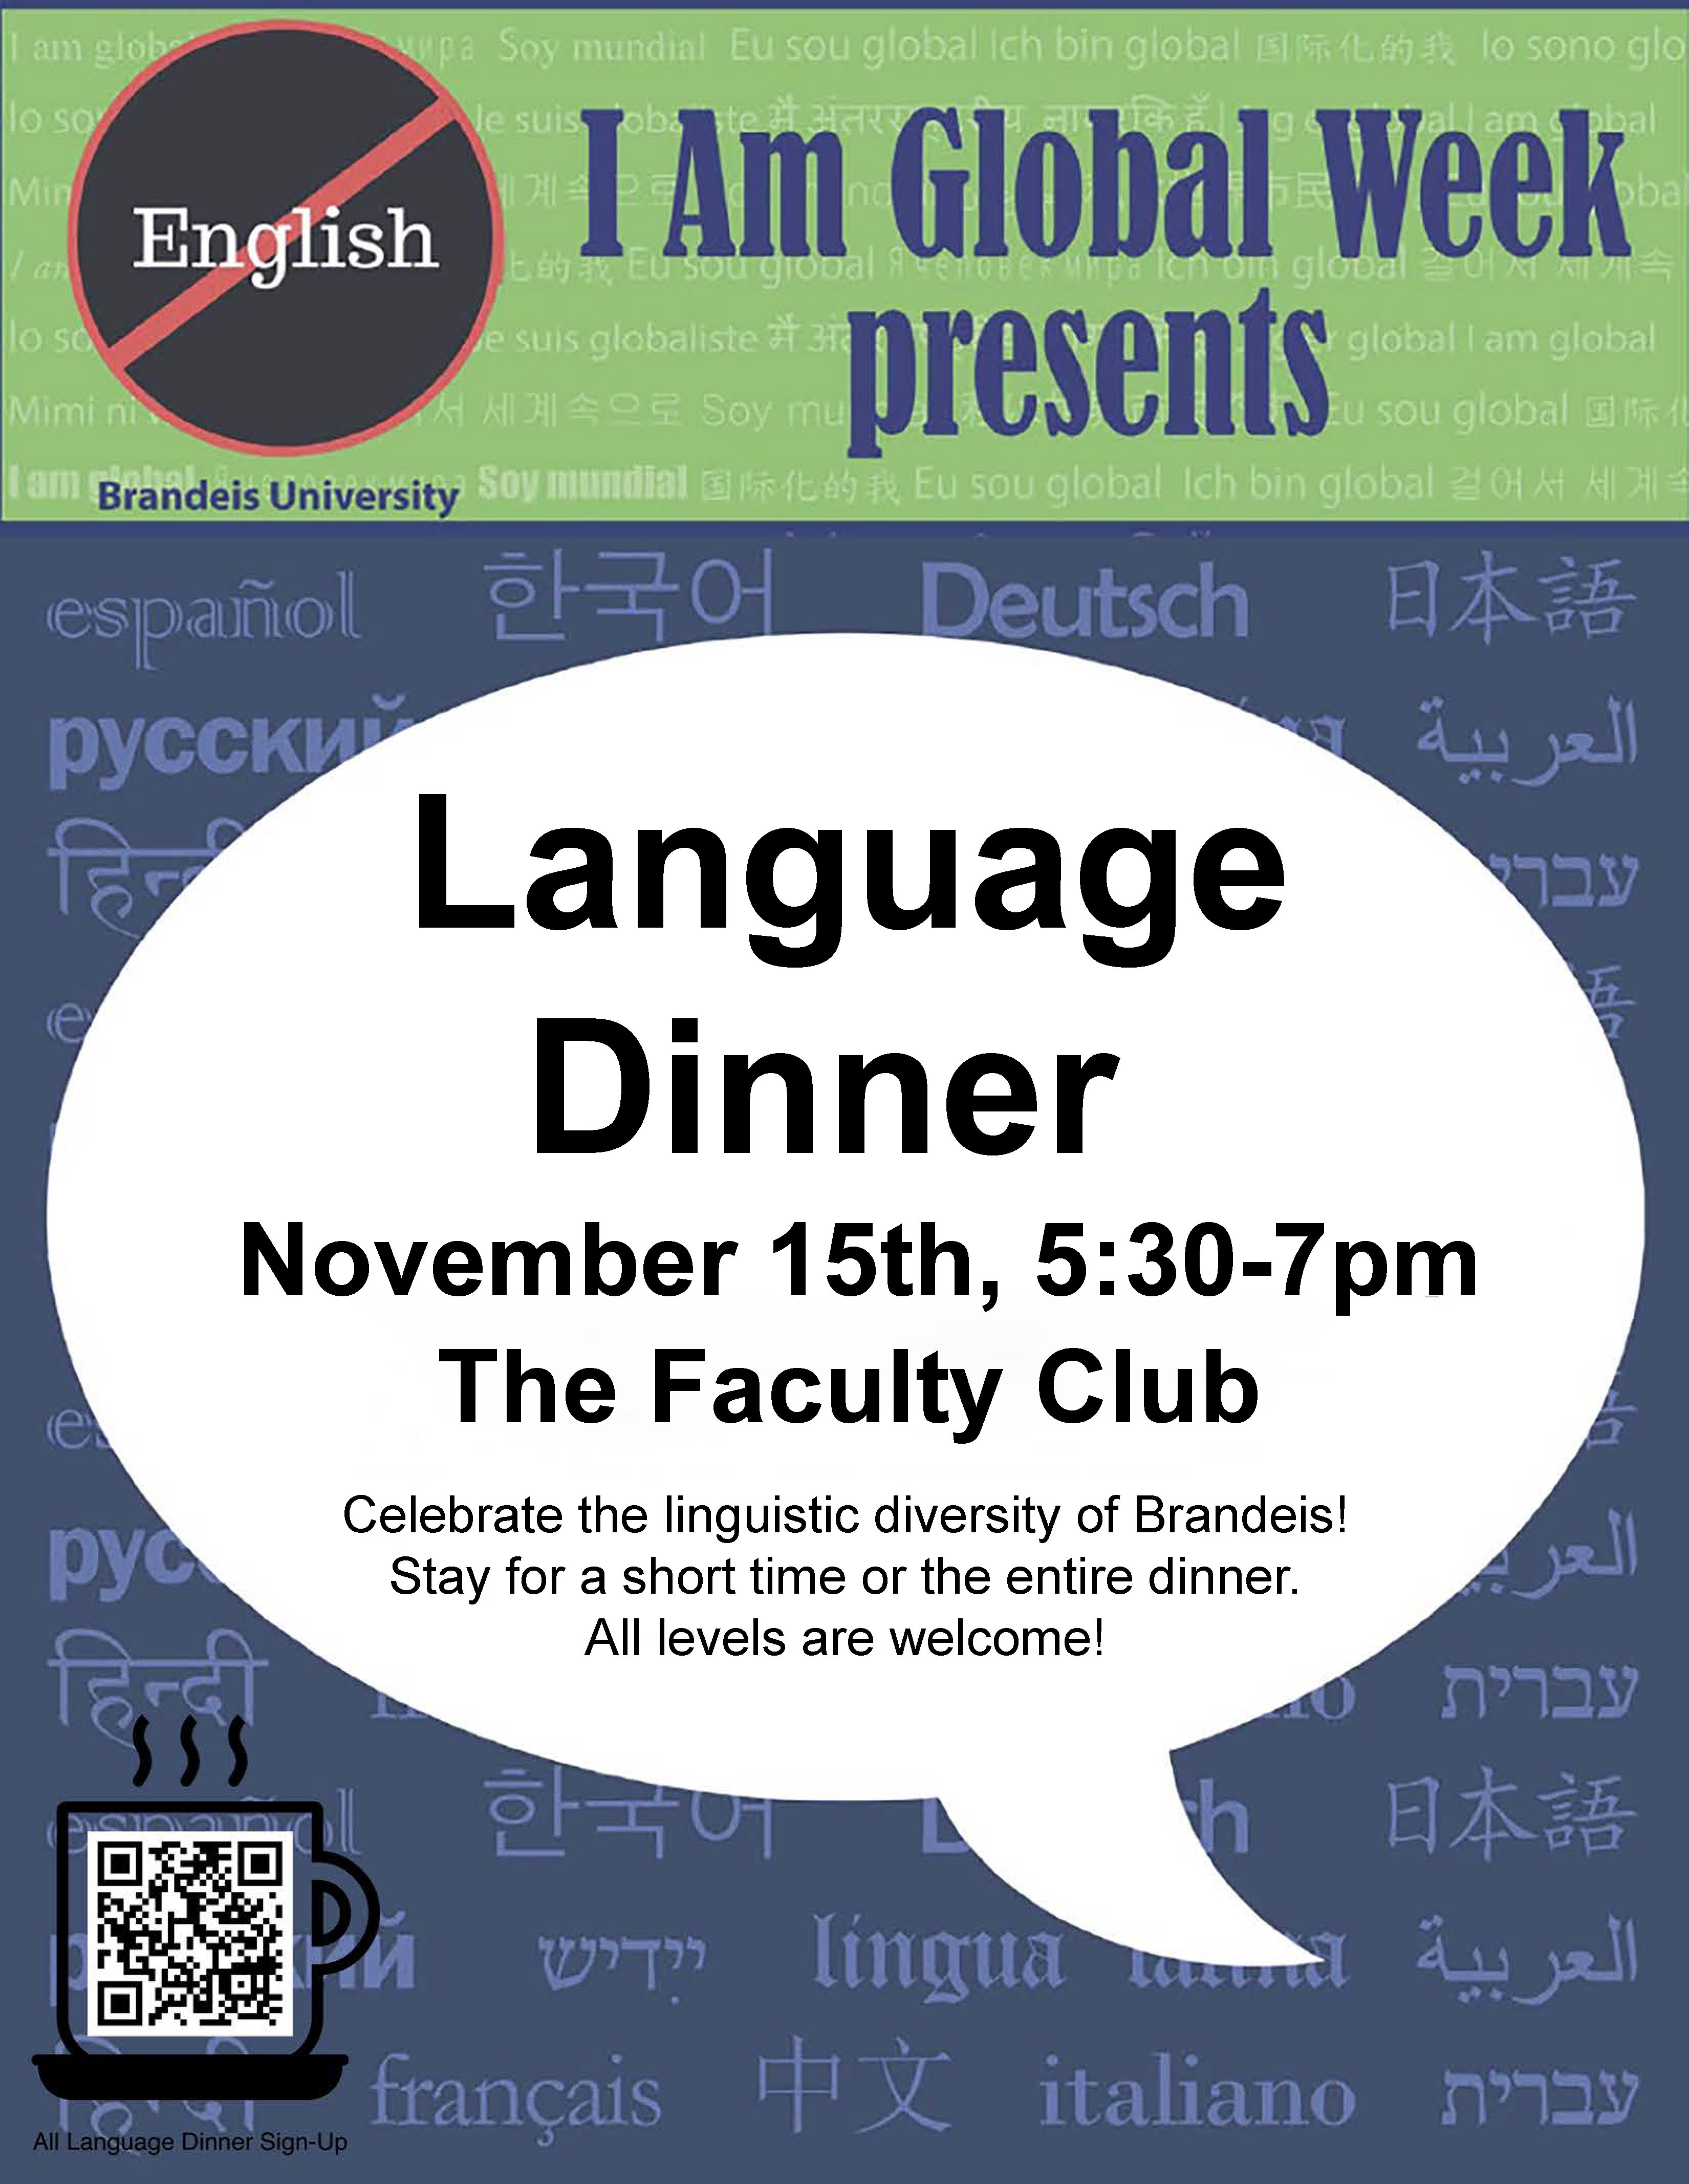 flyer for All Languages Dinner event. names of languages taught at Brandeis in the background; banner at top with "English" crossed out and "I Am Global Week presents"; other text matches the description on this page. QR code at the bottom corner links to the registration form also linked on this page.